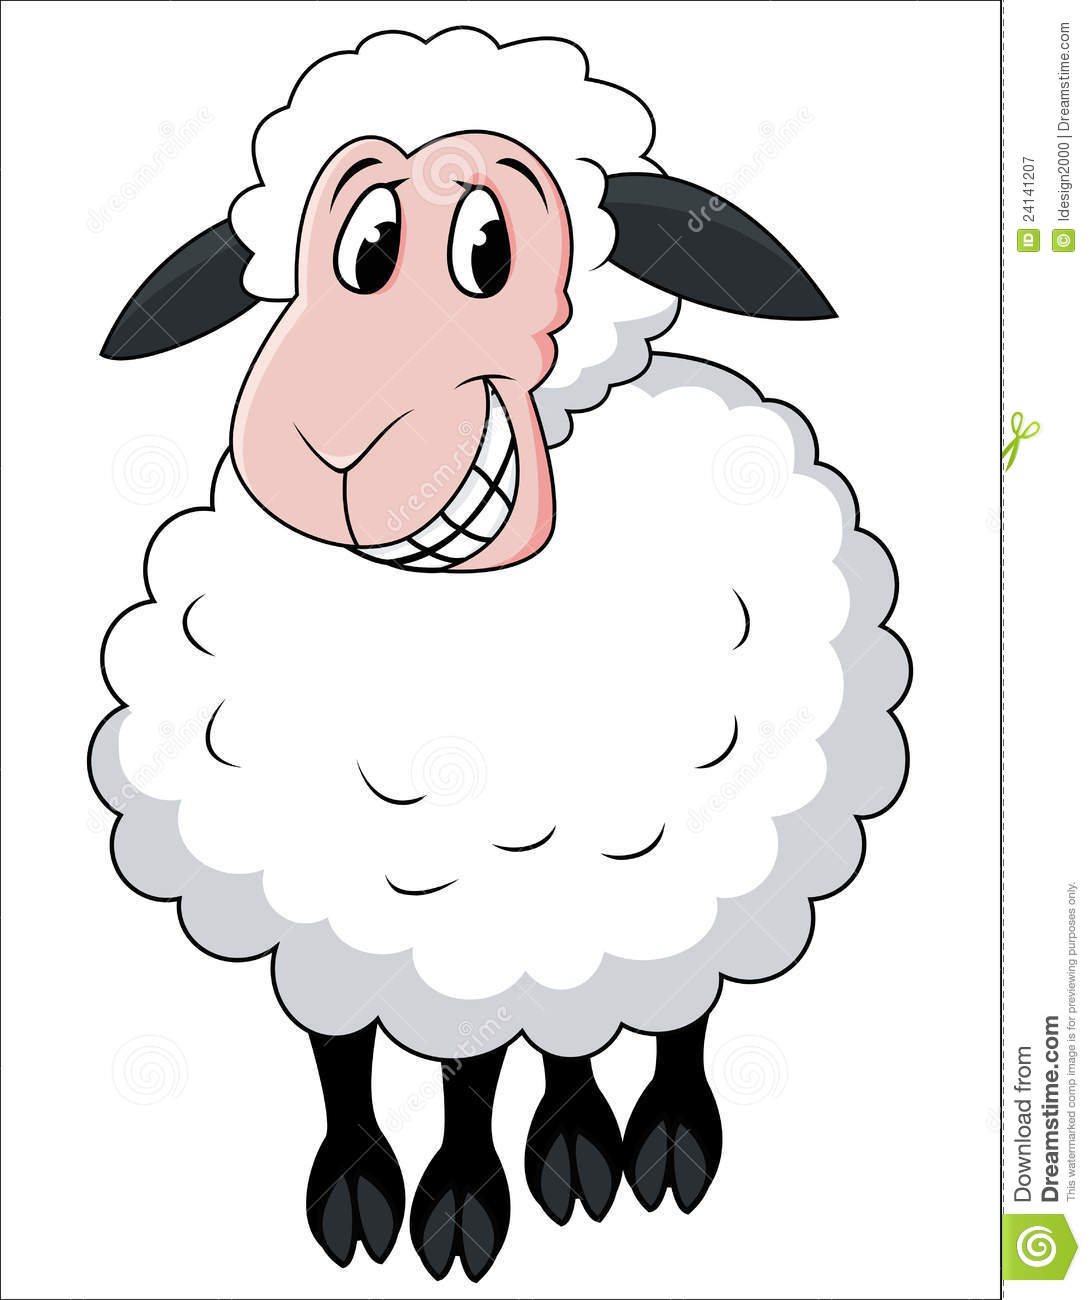 Free Sheep Clipart goat, Download Free Clip Art on Owips